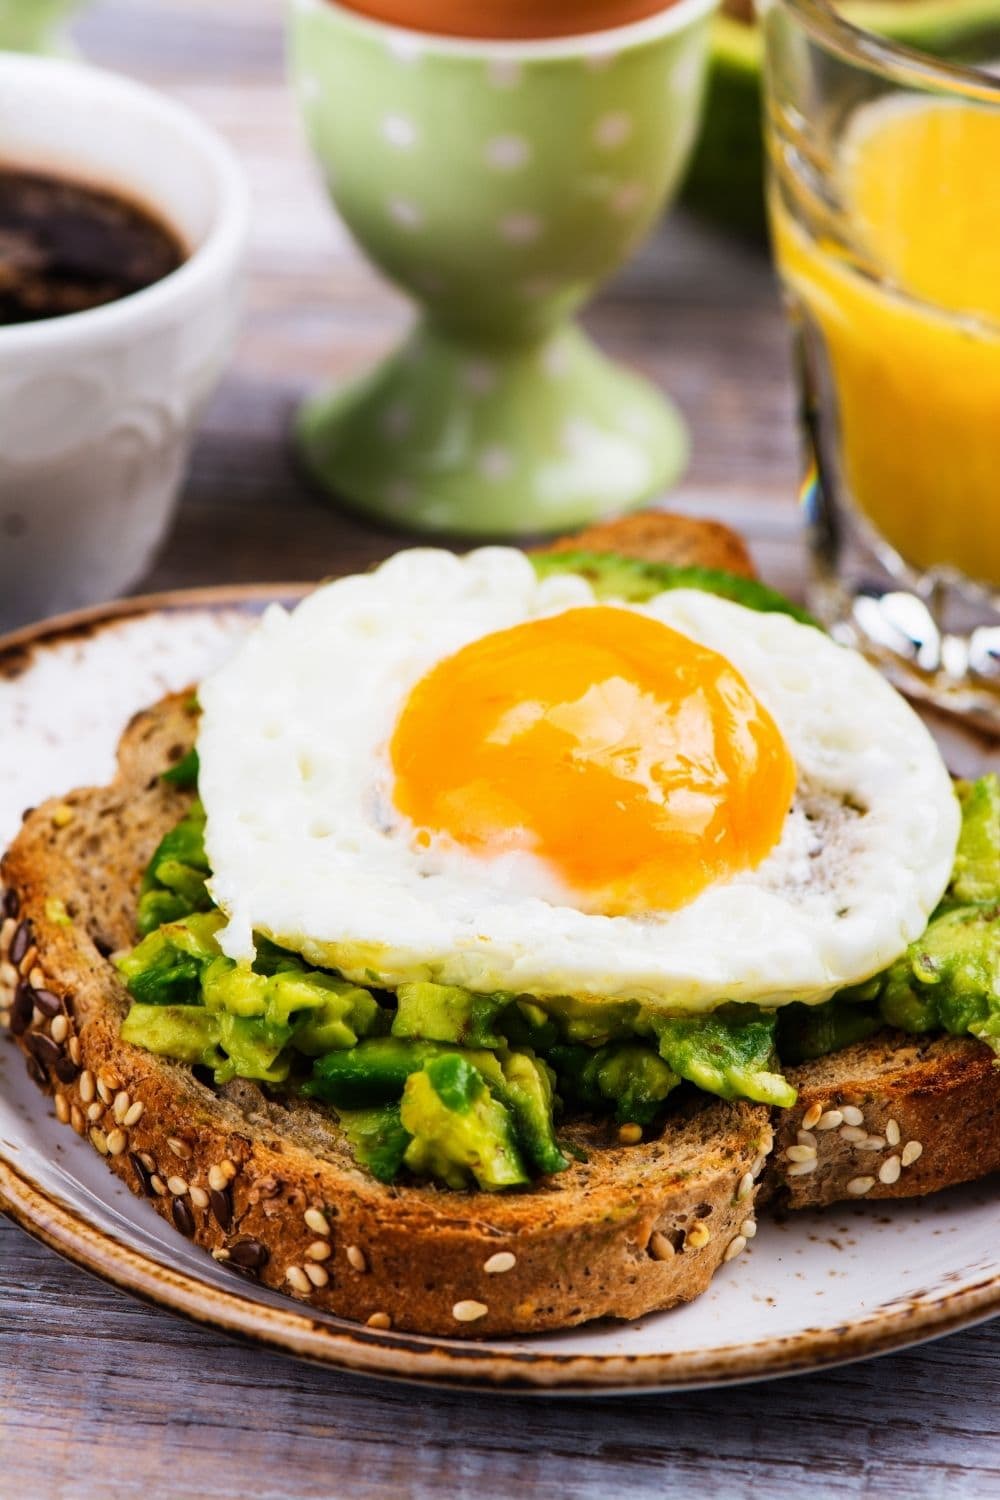 25 High-Protein Breakfast Ideas (+ Easy Recipes) - Insanely Good